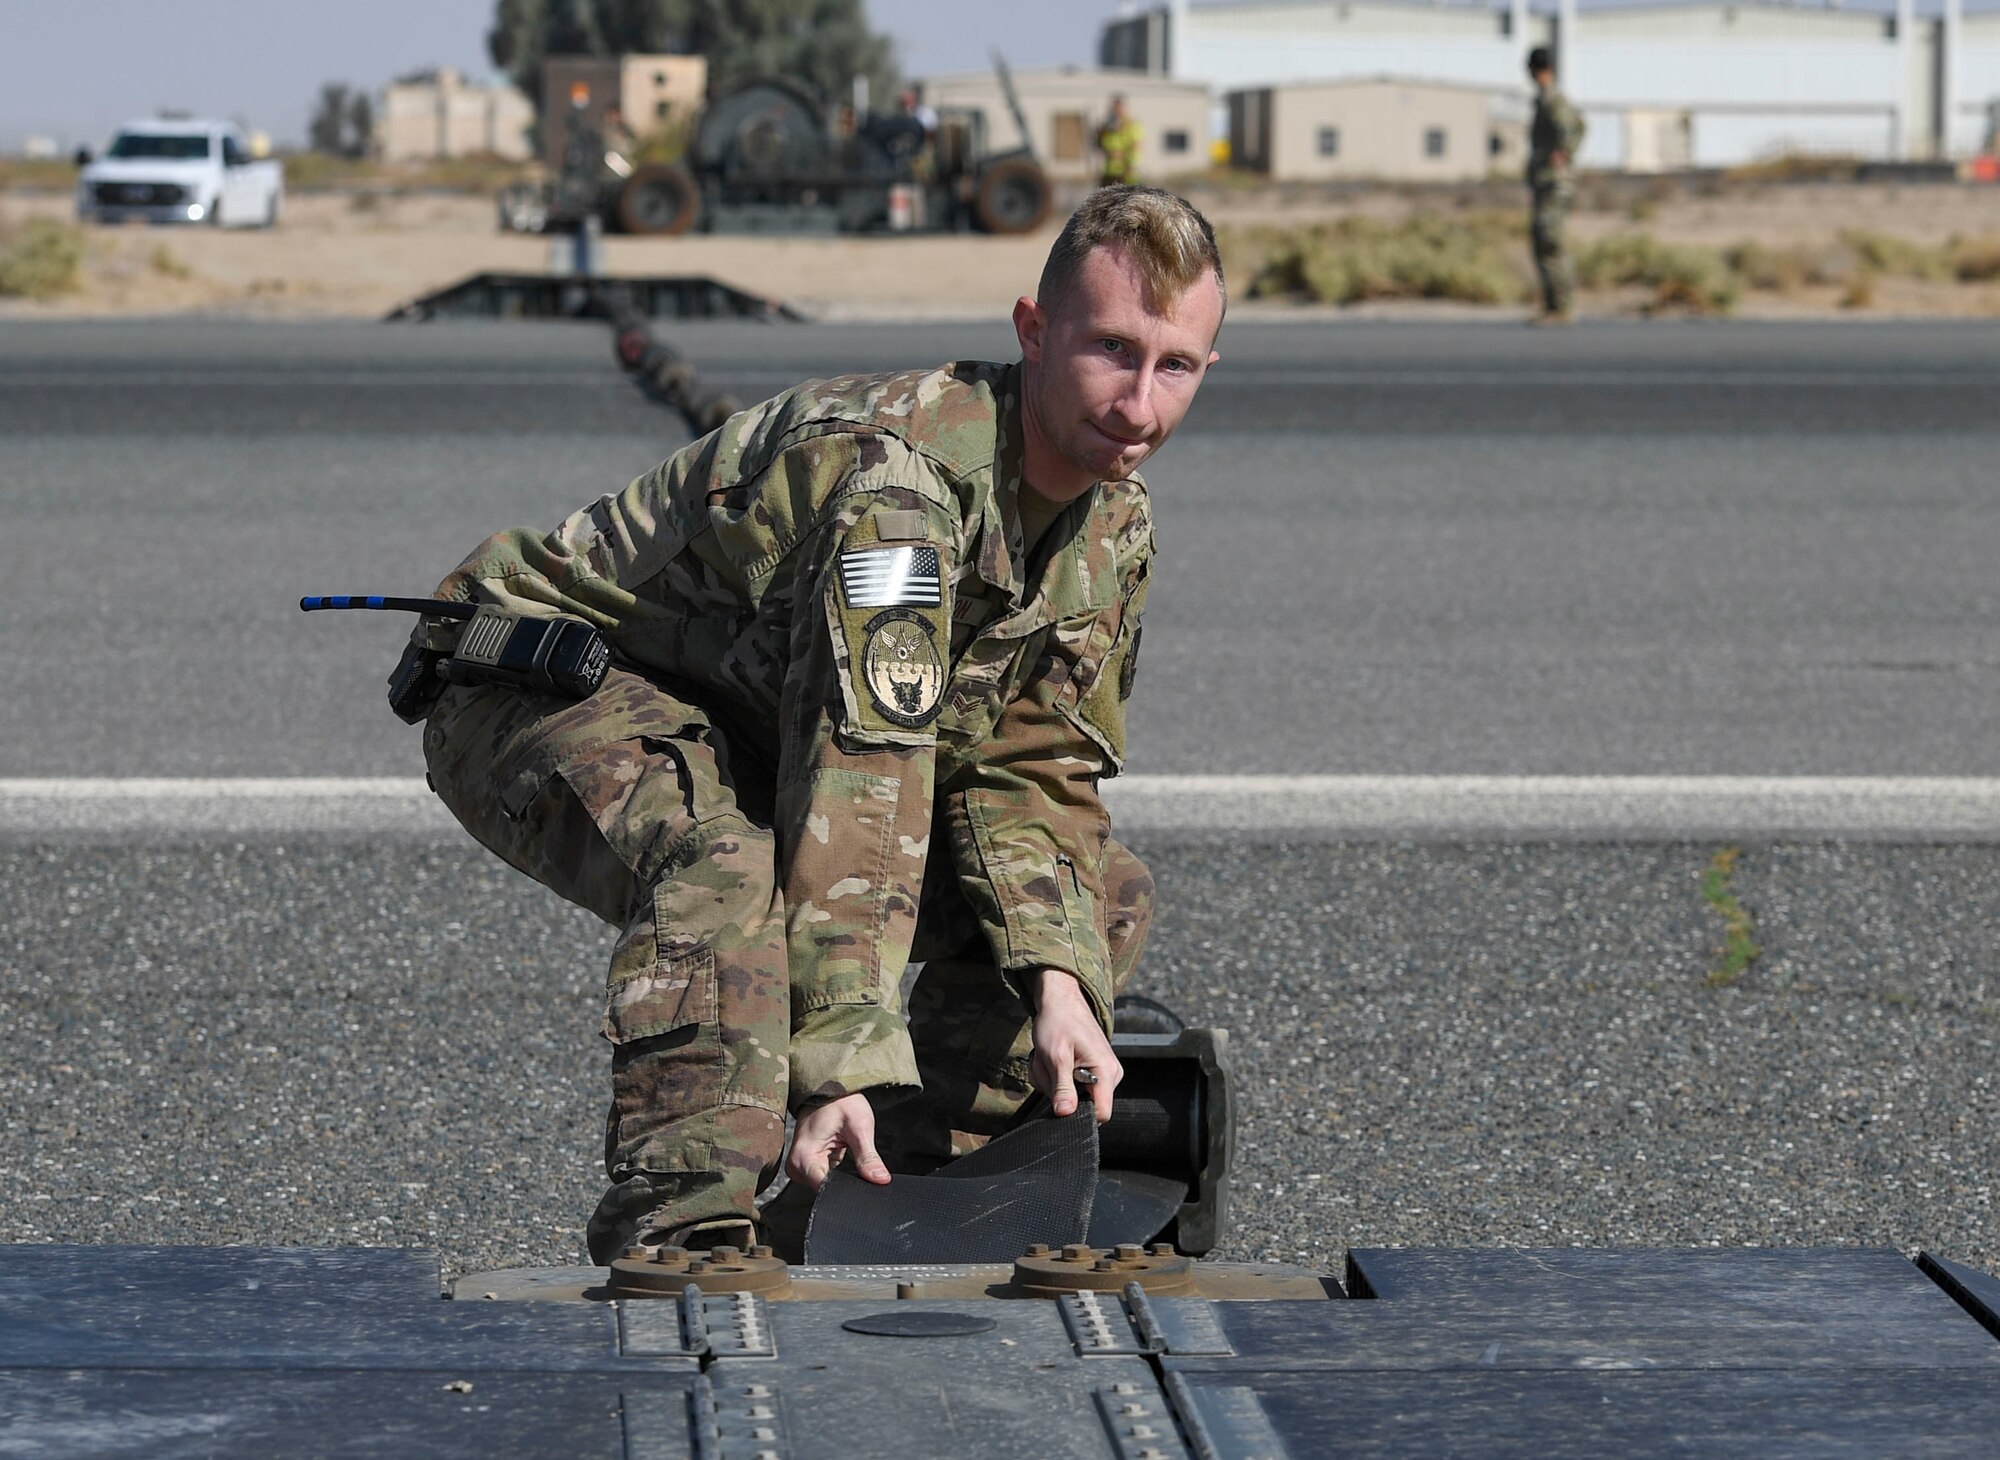 U.S. Air Force Senior Airman Benjamin Wilson, 386th Expeditionary Civil Engineer Squadron electrical power production journeyman, adjusts a component of the Mobile Aircraft Arresting System during a MAAS certification at Ali Al Salem Air Base, Kuwait, Nov. 22, 2020.